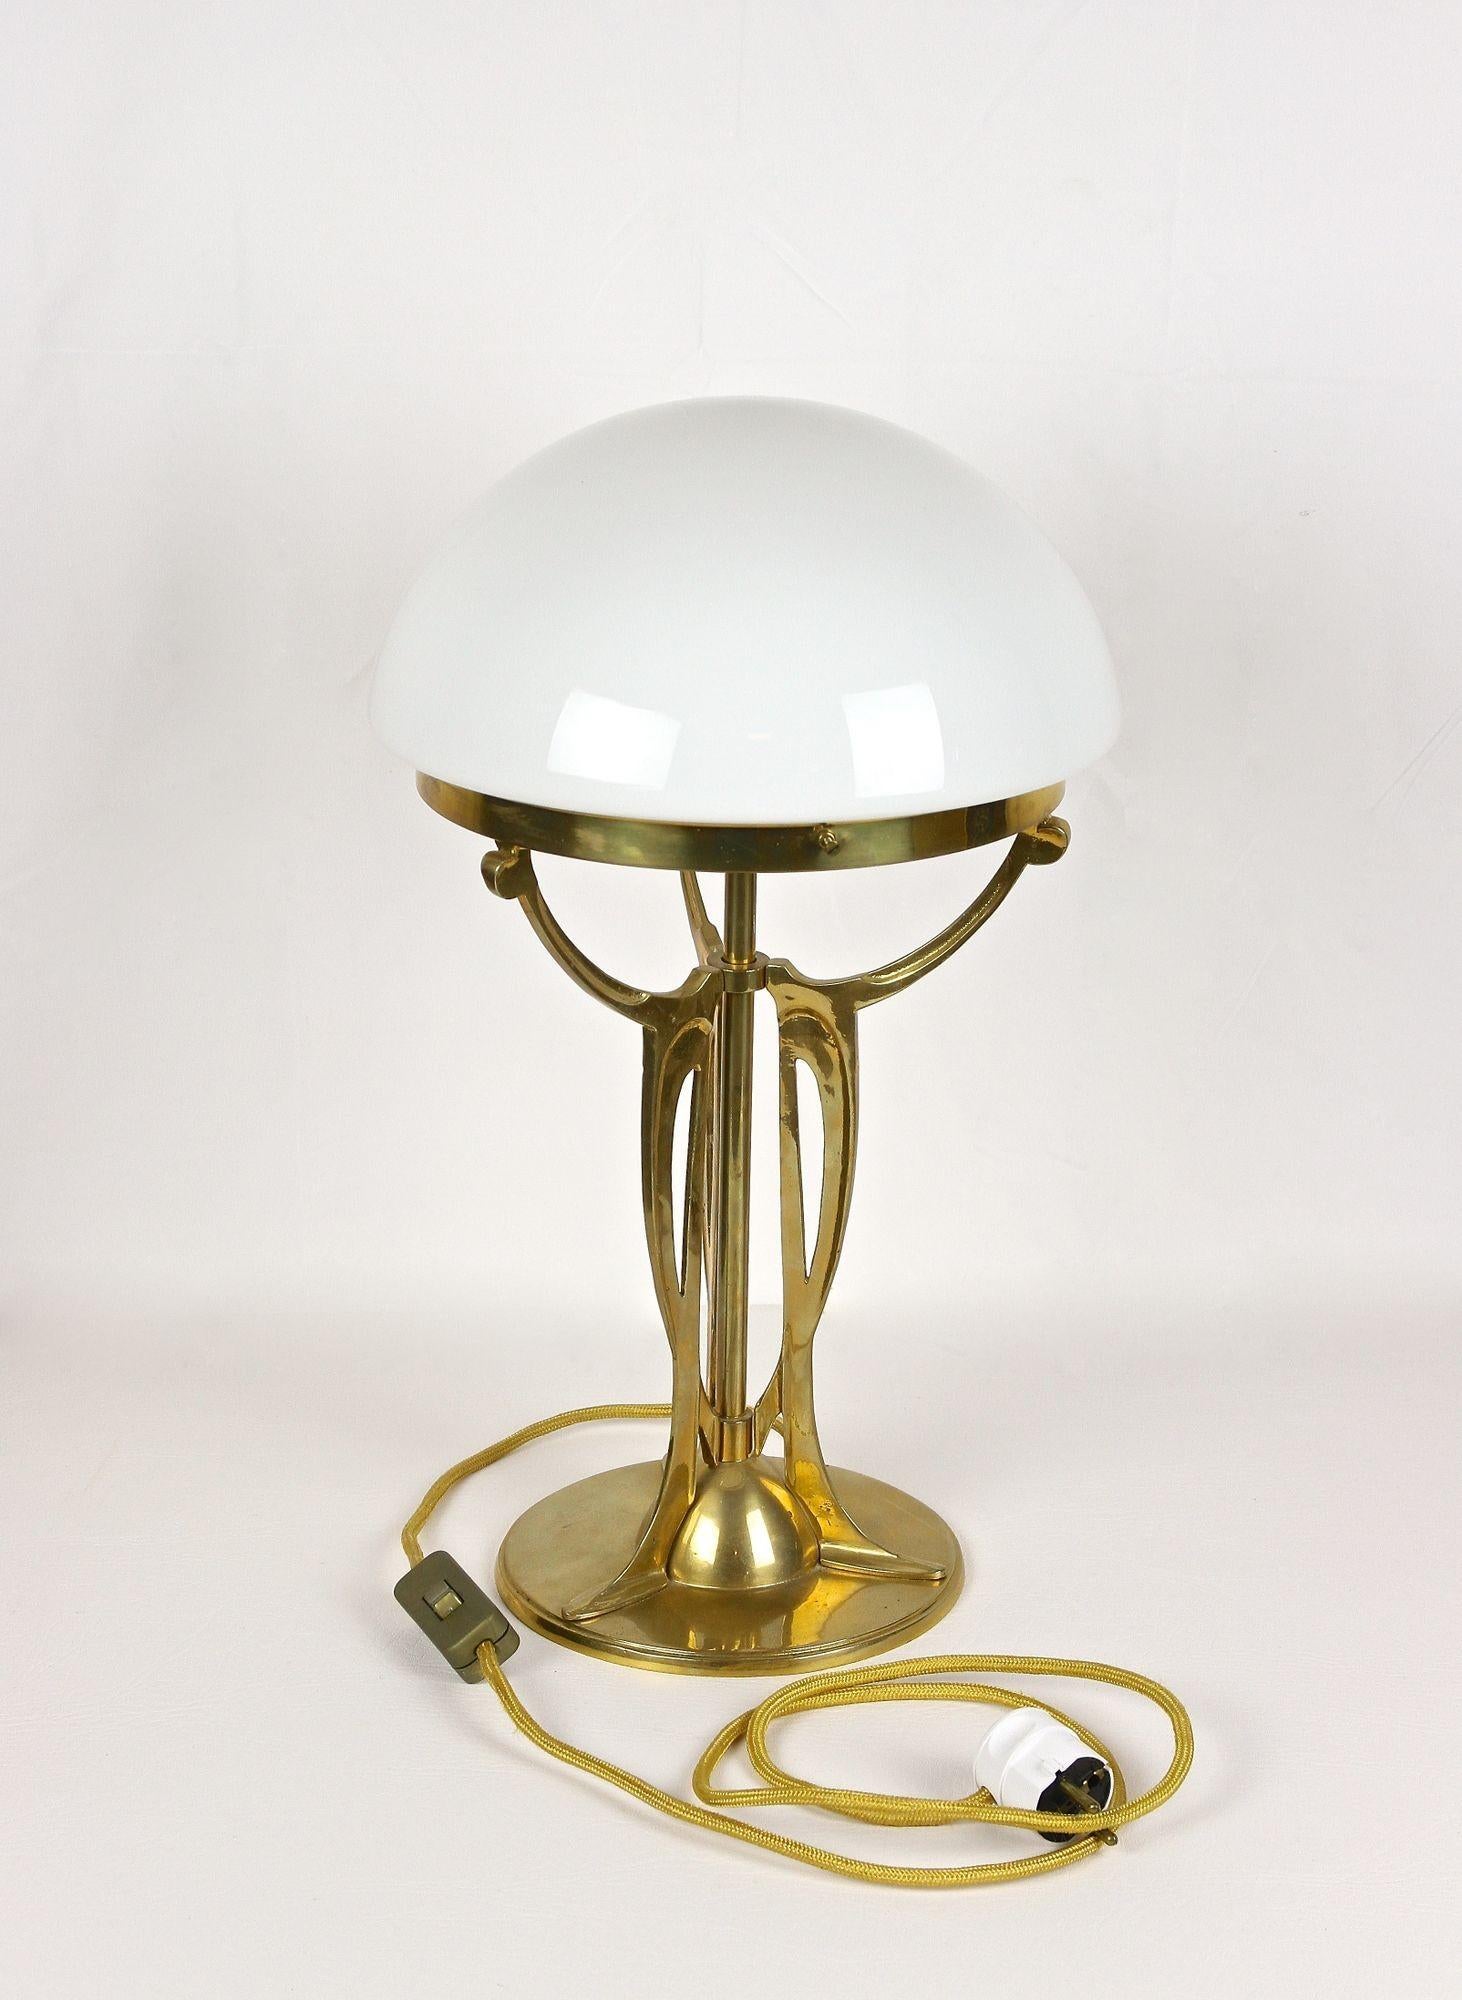 20th Century Art Nouveau Gilt Brass Table Lamp With White Glass Lampshade, Austria ca. 1910